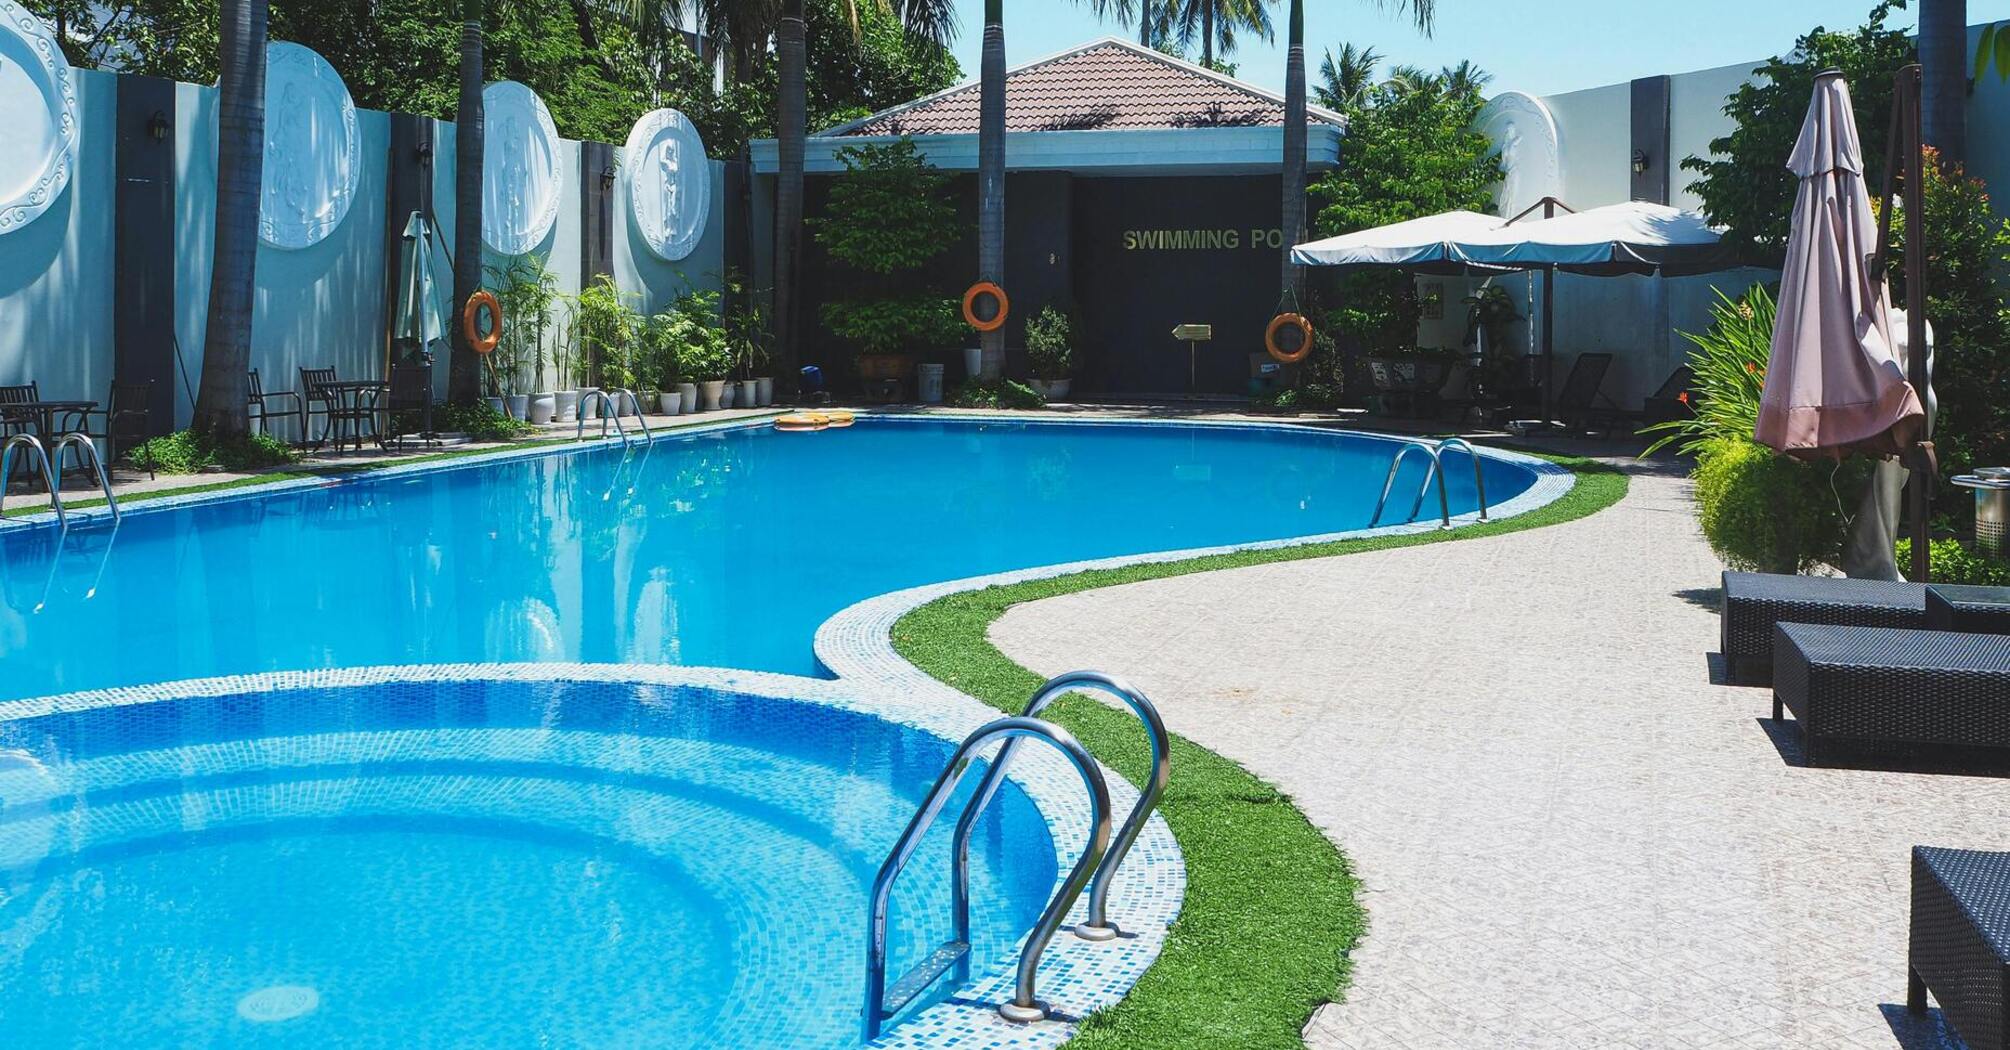 Pros and cons of ultraviolet pool cleaning: what you should know before installing the system